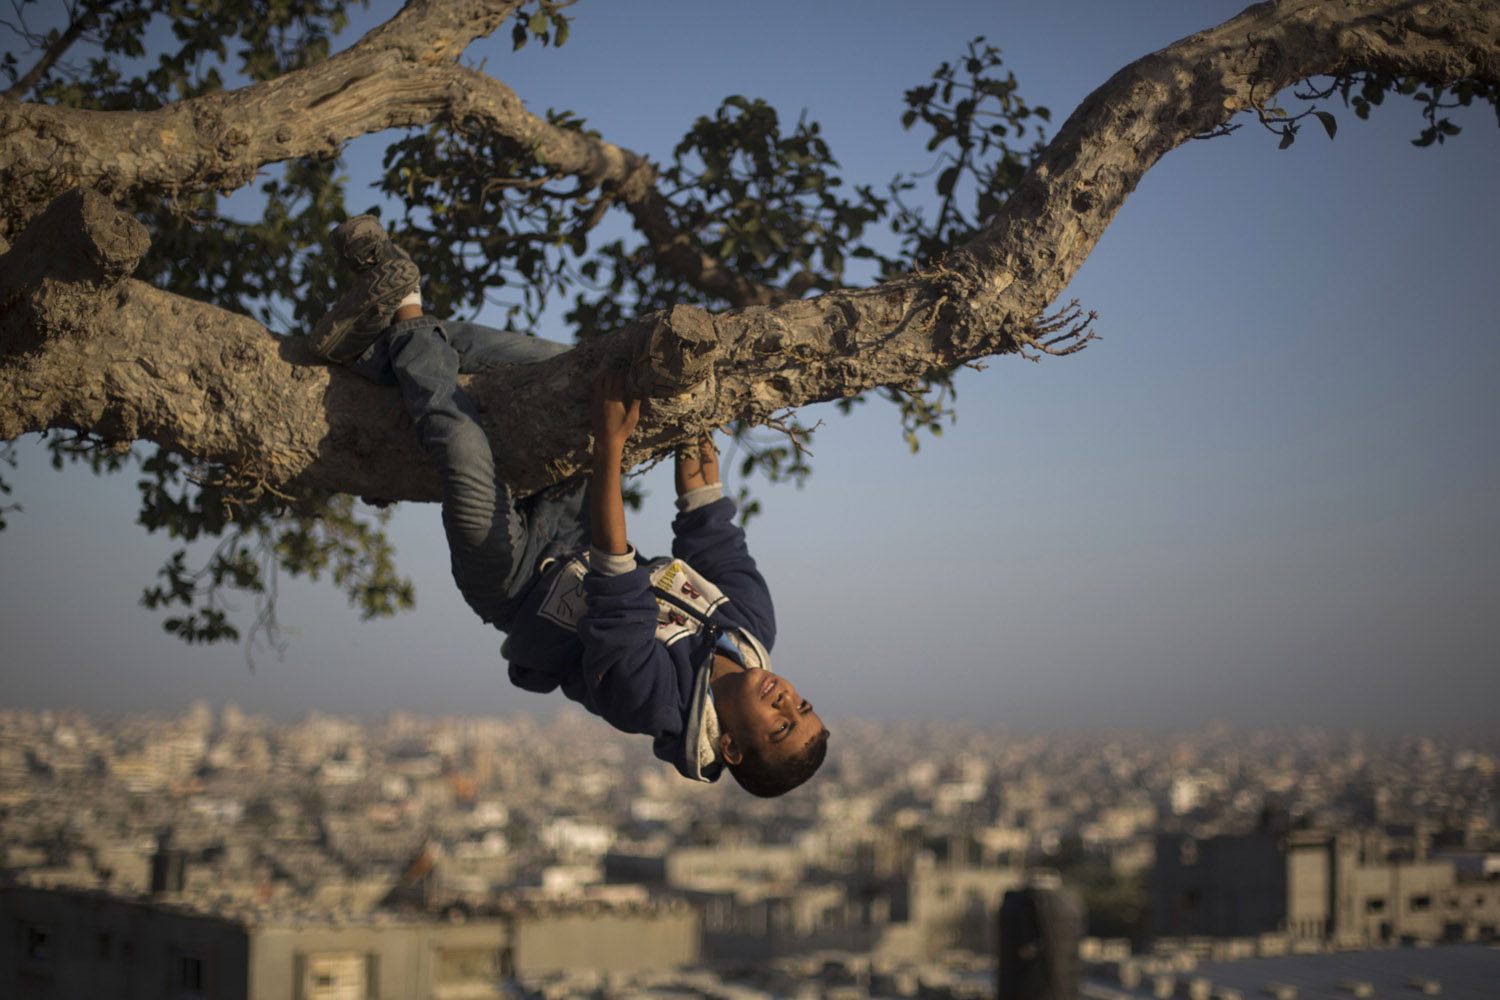 Oct. 23, 2013. A Palestinian boy hangs from a tree overlooking Gaza City.